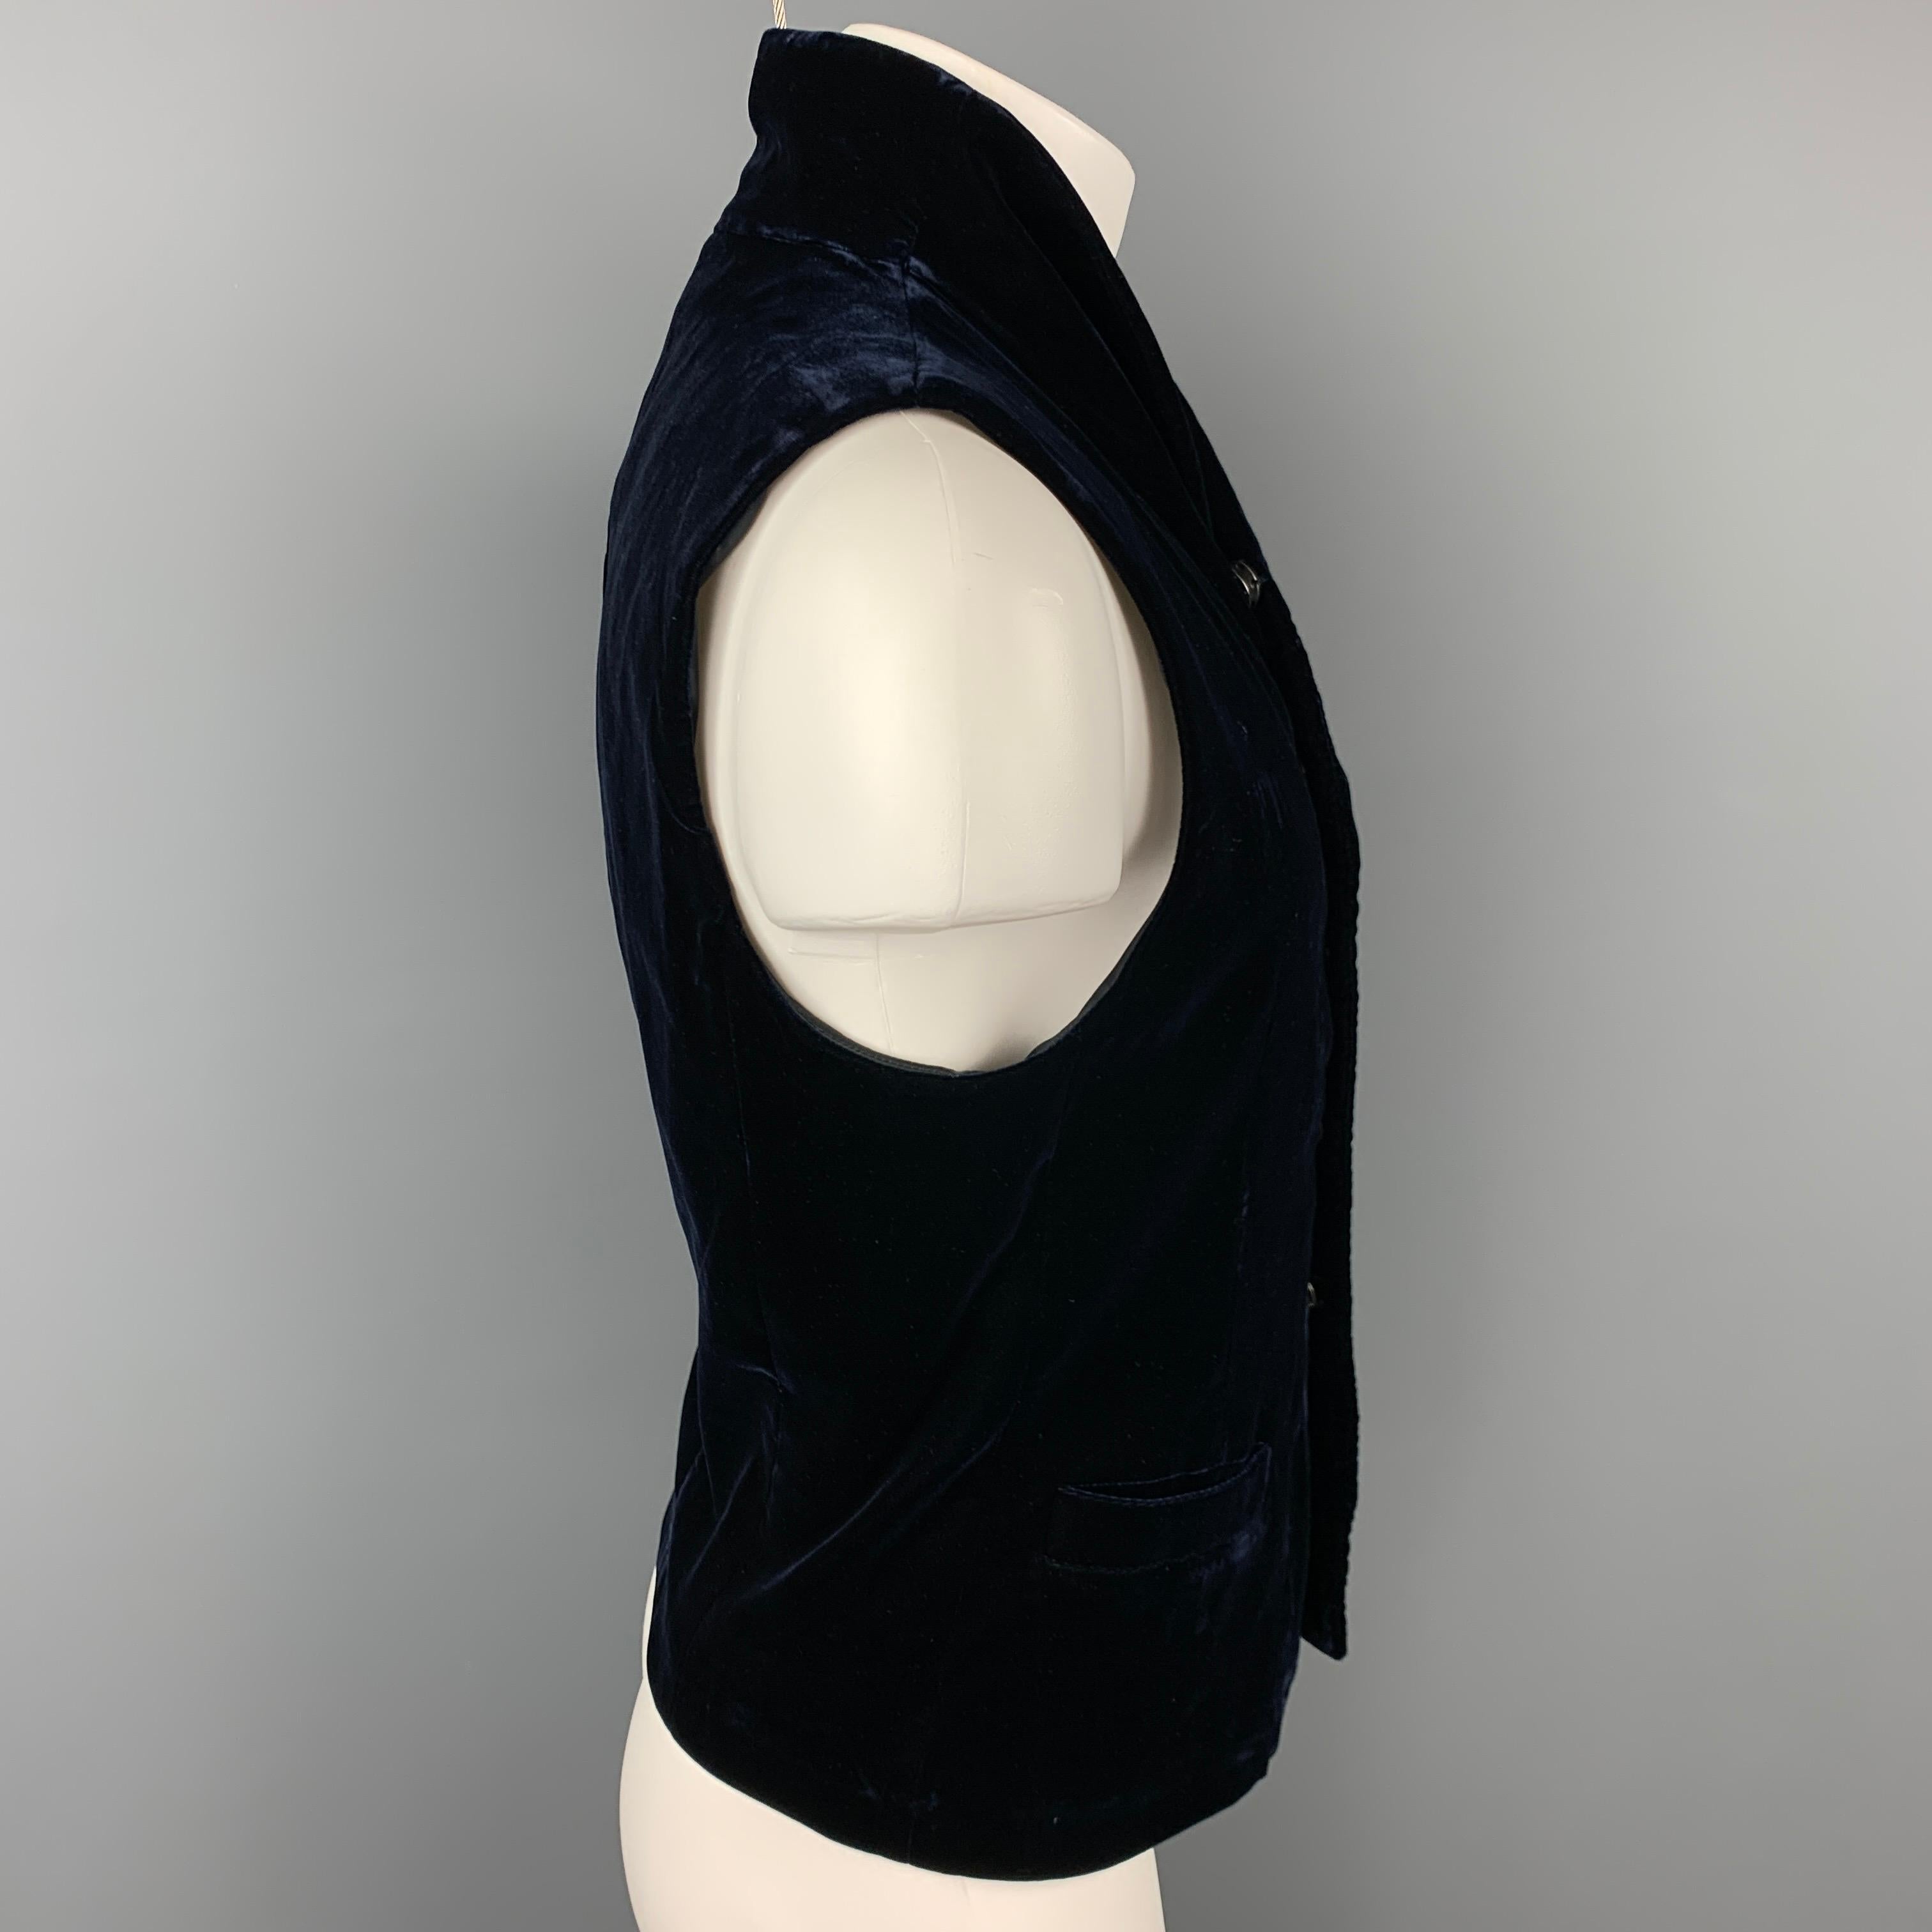 GIORGIO ARMANI vest comes in a dark blue velvet with a full liner featuring a waistcoat style, shawl collar, slit pockets, and a snap button closure. Made in Italy.

Very Good Pre-Owned Condition.
Marked: IT 48
Original Retail Price: